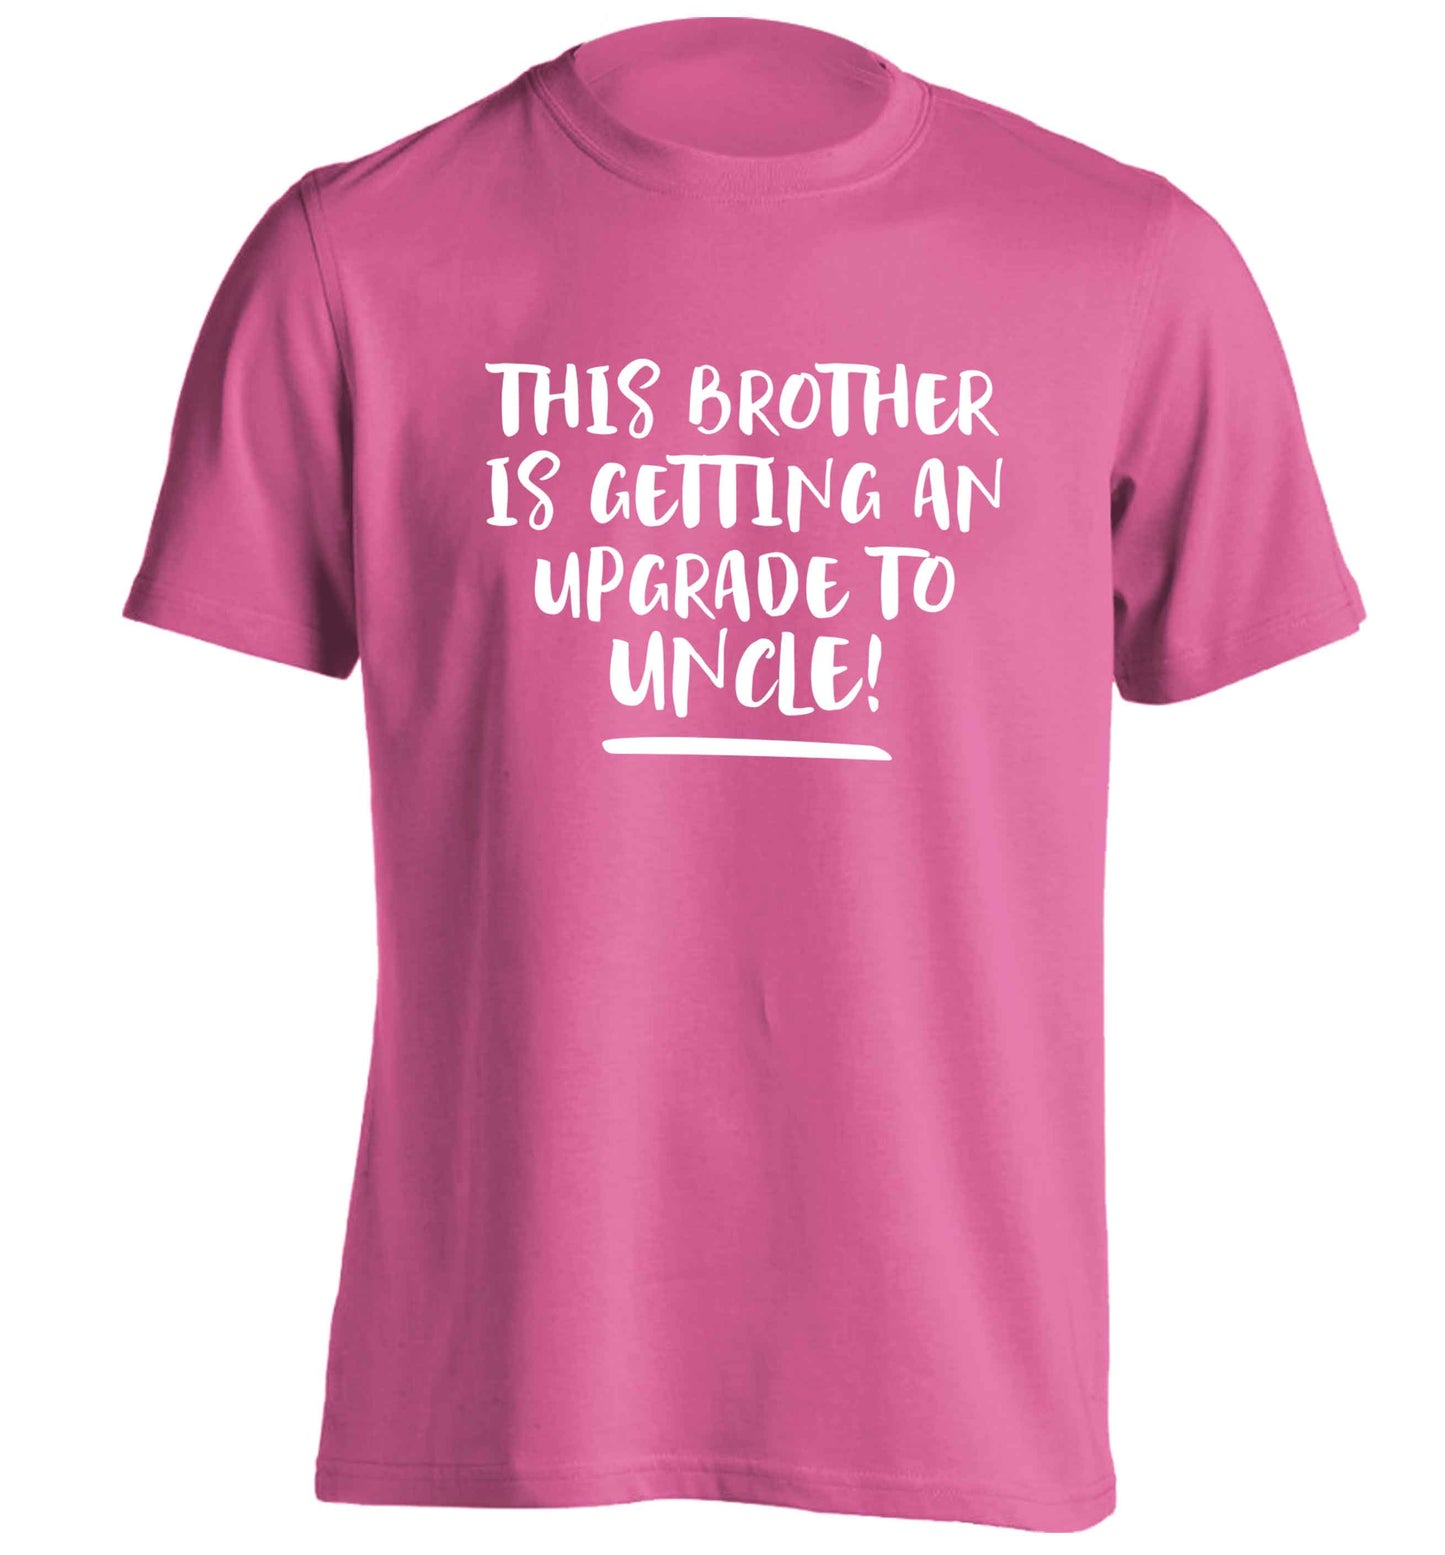 This brother is getting an upgrade to uncle! adults unisex pink Tshirt 2XL